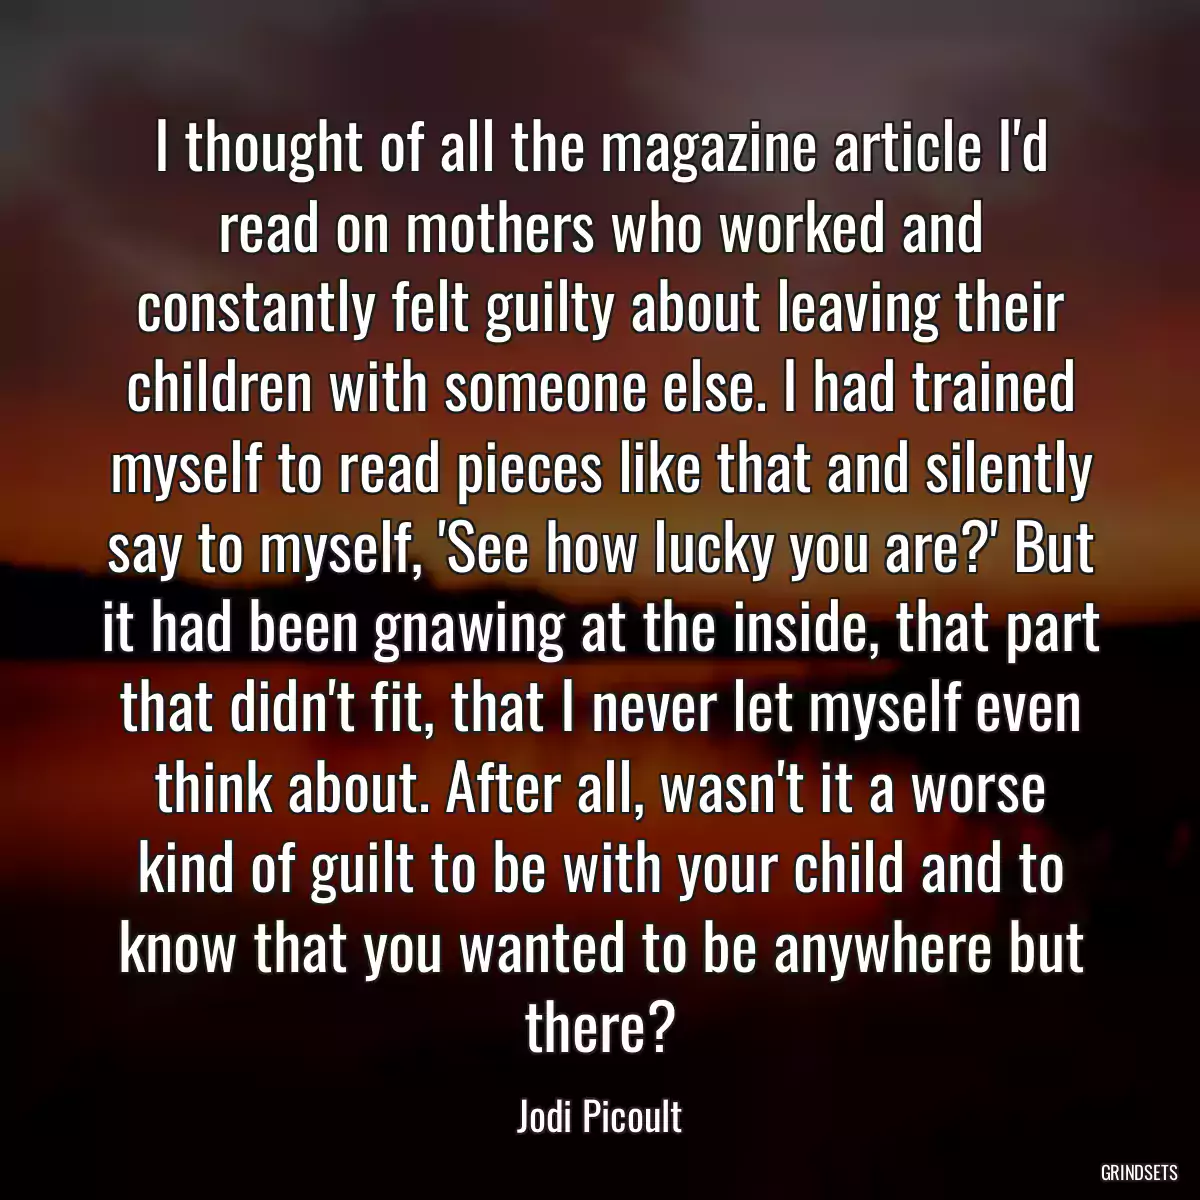 I thought of all the magazine article I\'d read on mothers who worked and constantly felt guilty about leaving their children with someone else. I had trained myself to read pieces like that and silently say to myself, \'See how lucky you are?\' But it had been gnawing at the inside, that part that didn\'t fit, that I never let myself even think about. After all, wasn\'t it a worse kind of guilt to be with your child and to know that you wanted to be anywhere but there?